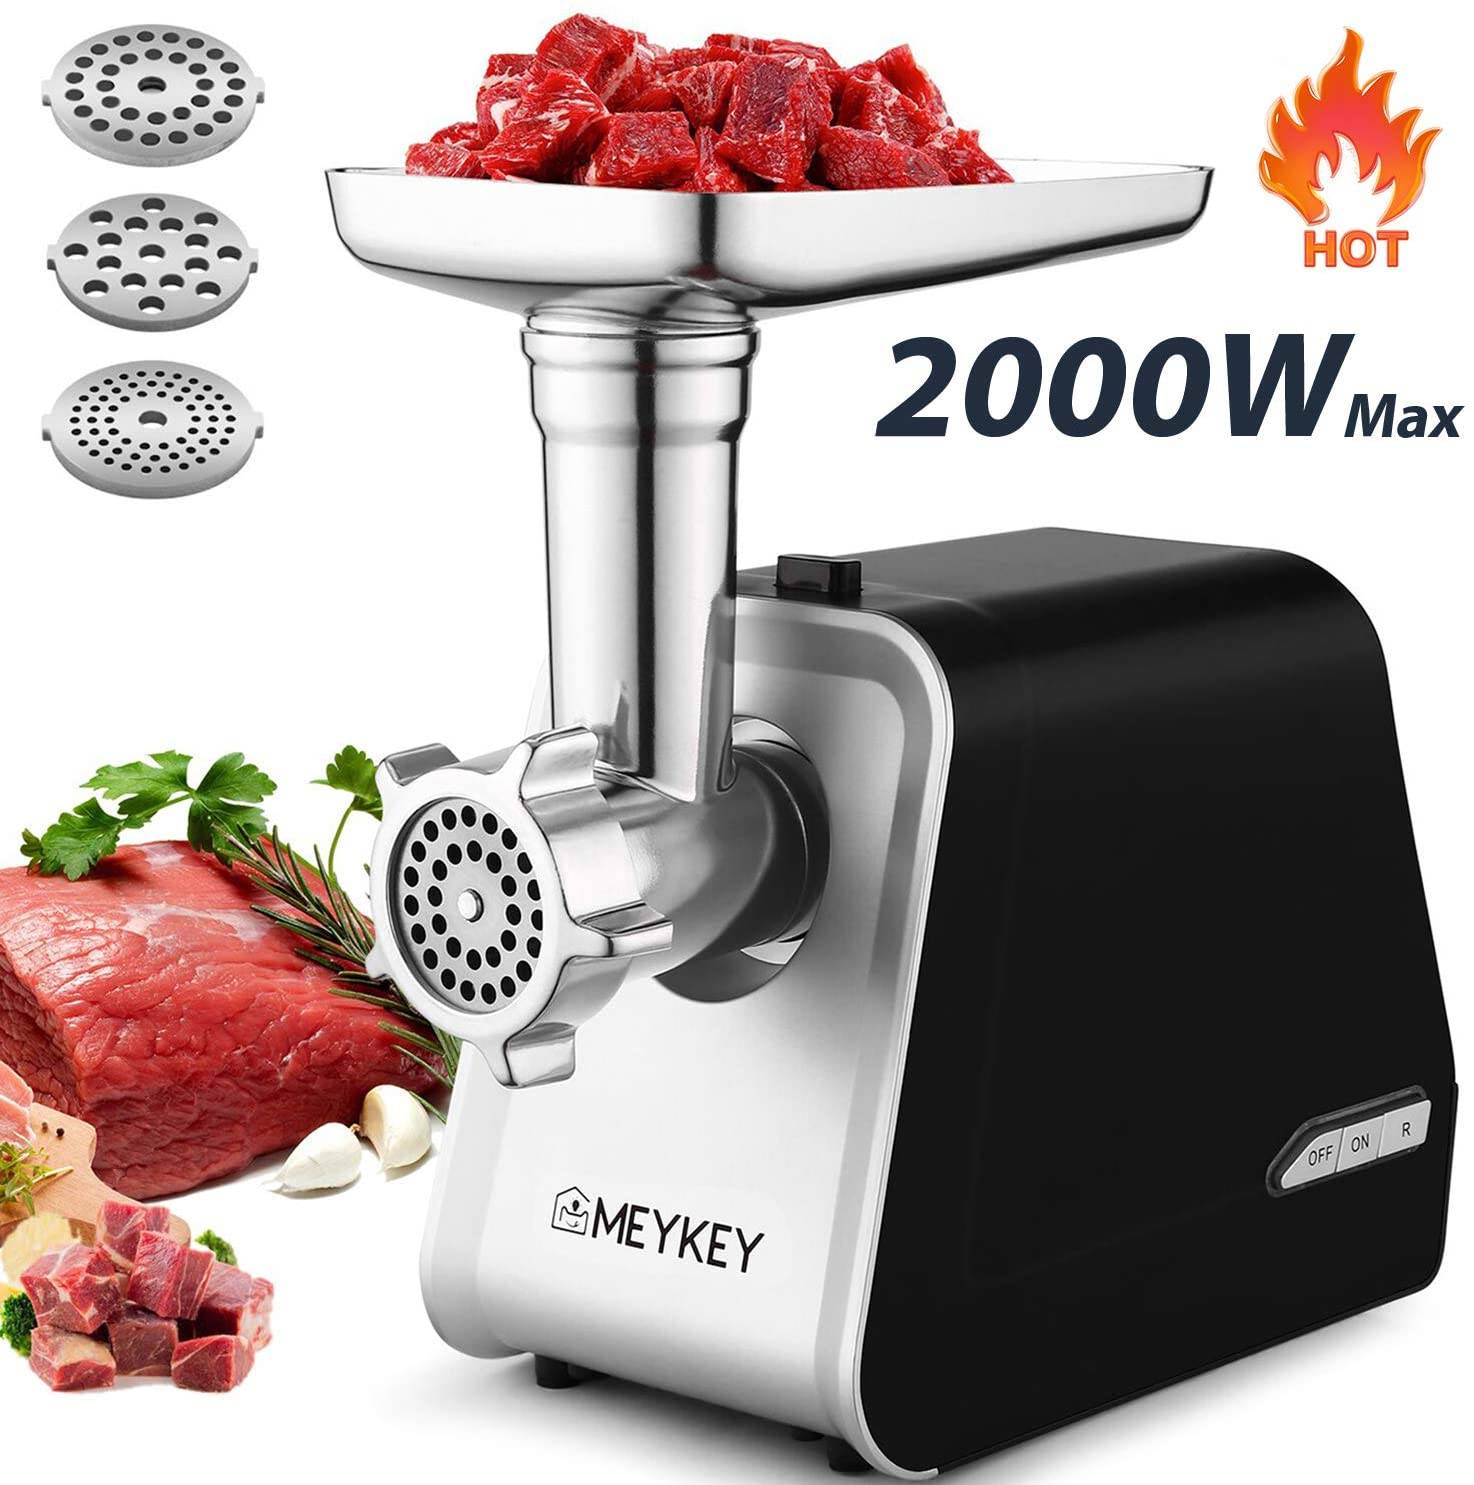 LHS Manual Meat Grinder, Heavy Duty Meat Mincer Sausage Stuffer, 3-in-1  Hand Grinder with Stainless Steel Blades for Meat, Sausage, Cookies, Easy  to